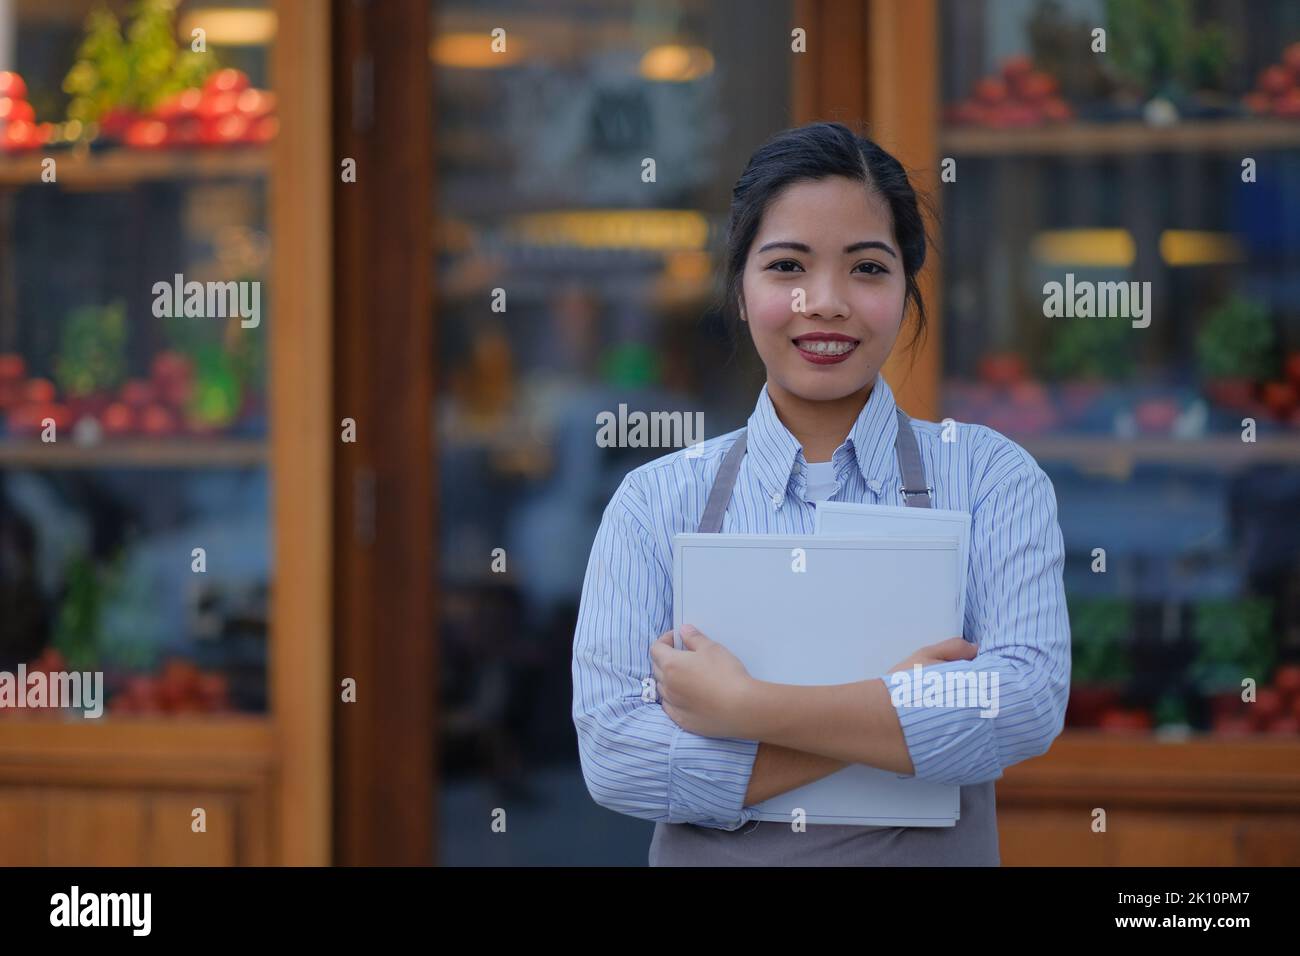 Young Filipino waitress waits outside an Italian restaurant window with menus and a smile. Outdoor portrait of an Asian female in the service industry. Stock Photo